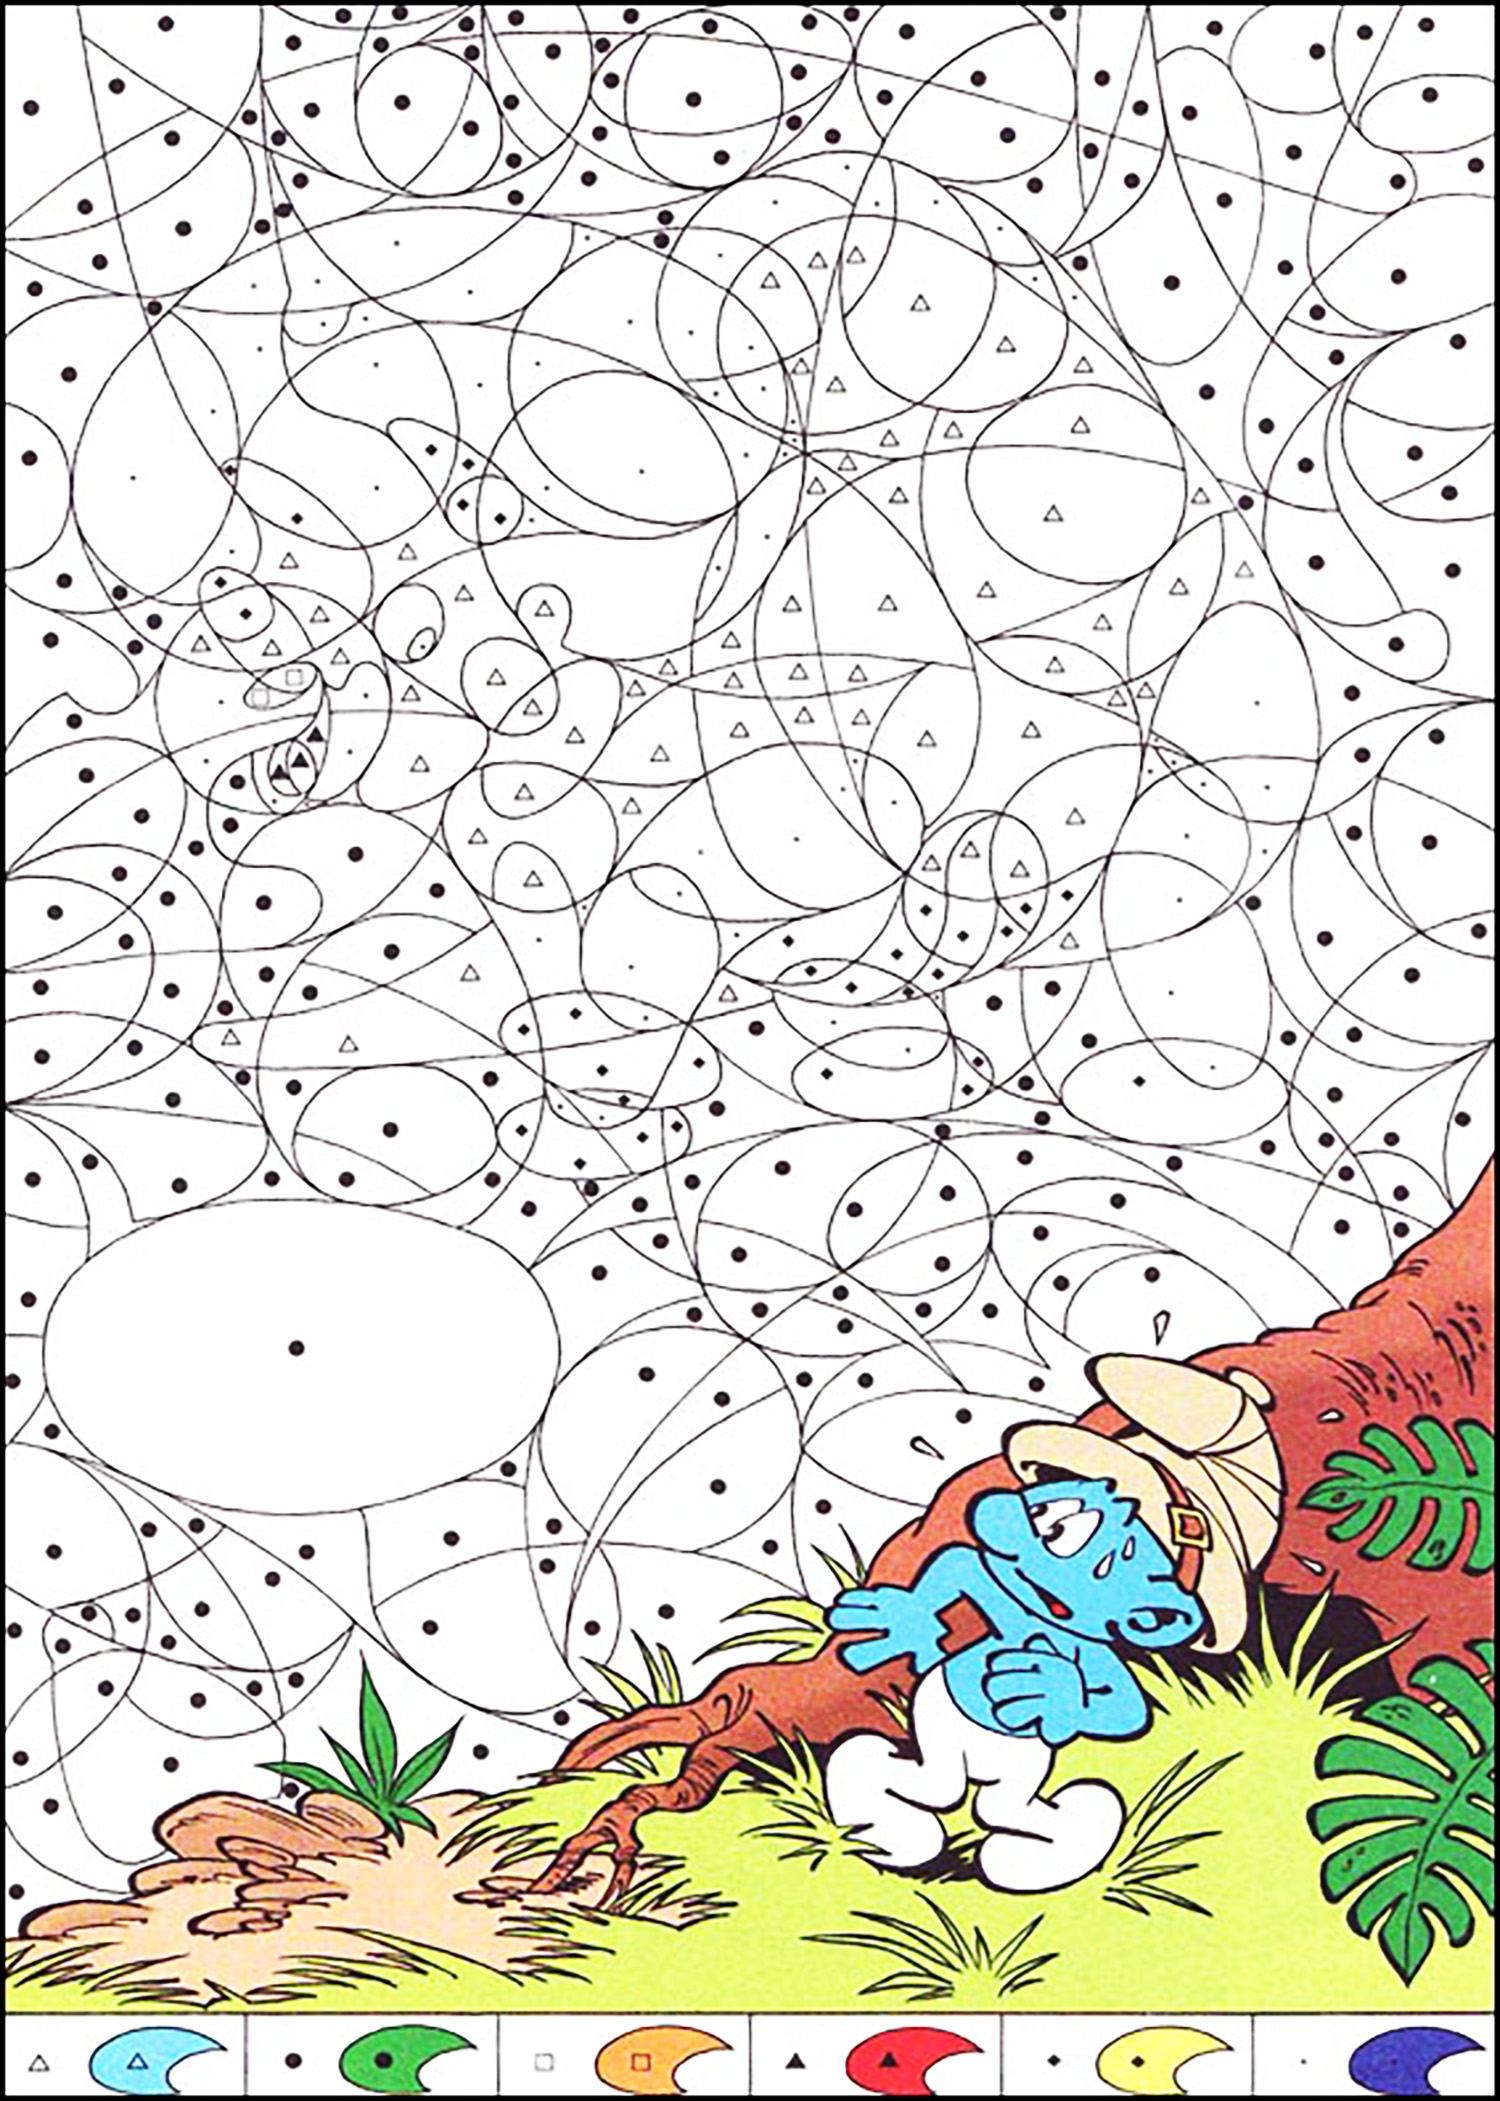 Download Magical smurf - Magical coloring pages for kids to print & color